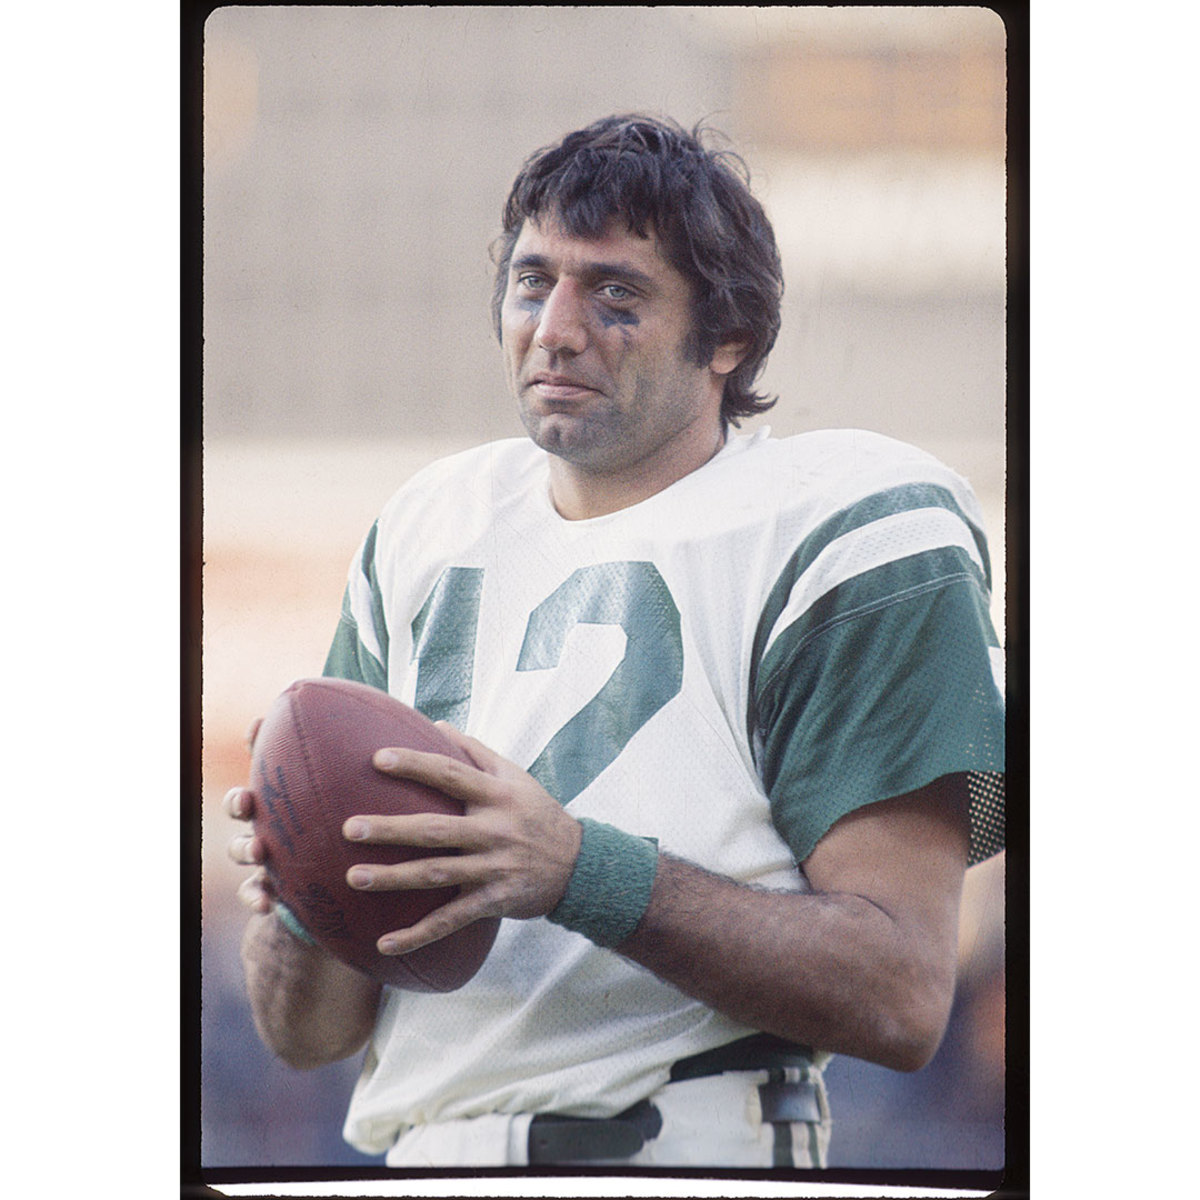 Portrait of football player in green and white jersey holding football